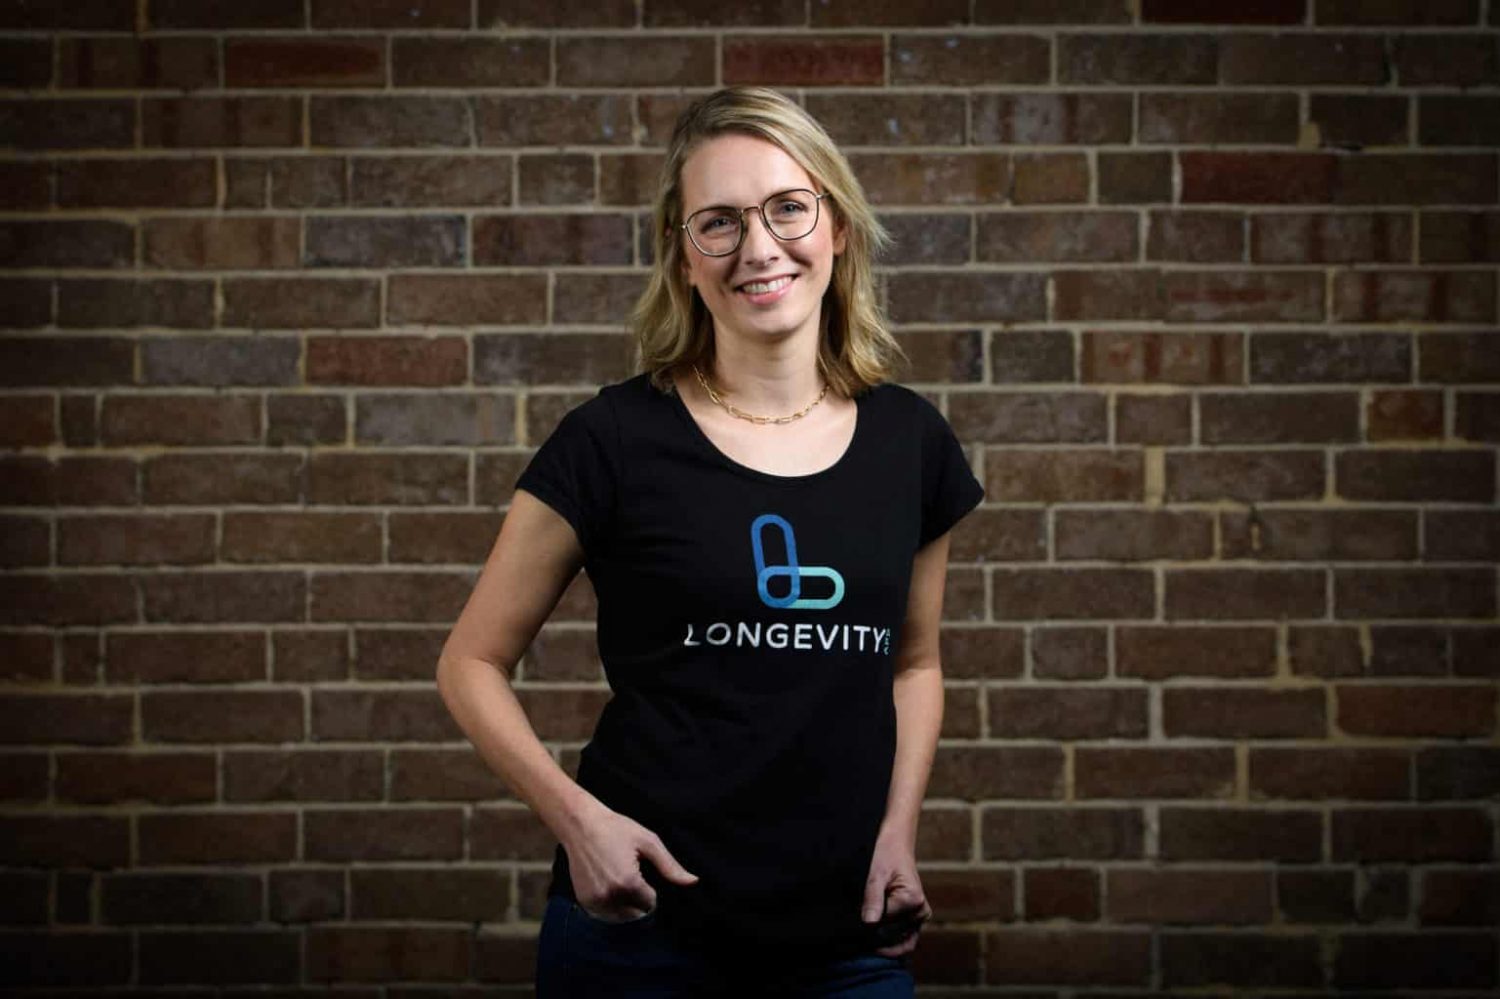 Carla Harris is the co-founder and CEO of Longevity App